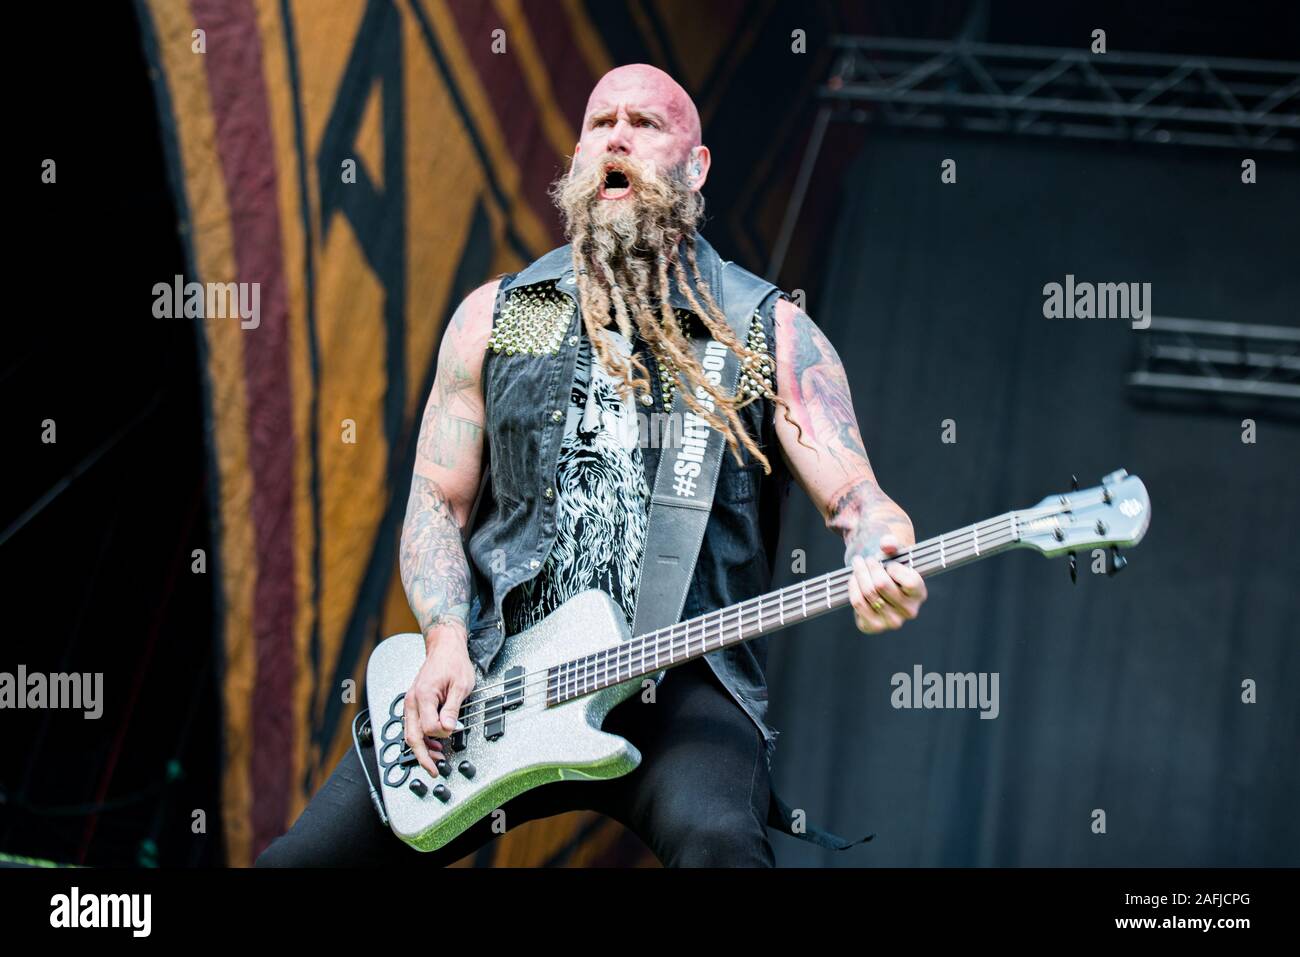 MUNICH, GERMANY - MAY 31: Chris Kael, bassist of the American metal band Five  Finger Death Punch (5FDP), performing live at the Rockavaria festival on  May 31, 2015 in Munich, Germany Stock Photo - Alamy